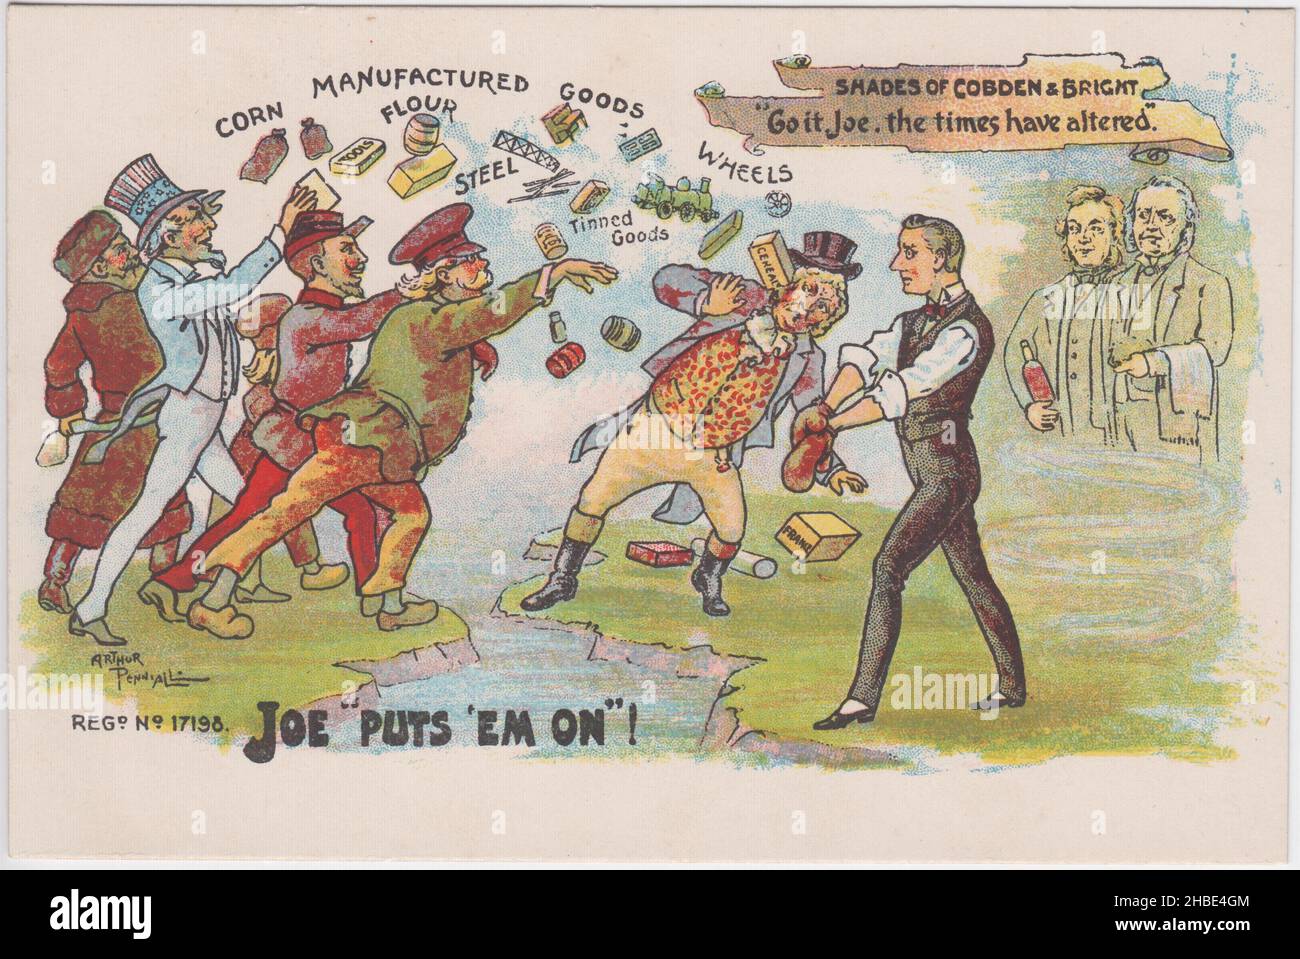 'Joe 'Puts 'em on'!': Cartoon showing Joseph Chamberlain standing in a boxing stance in defence of John Bull (symbolising Britain) as caricatures representing Russia, the United States of America, France & Germany hurl goods (including corn, flour, steel, tinned goods & wheels) into the UK. The ghosts of pro-free trade radical Liberal politicians Richard Cobden & John Bright are shown looking on approvingly. Early 20th century pro-tariff reform / protectionism postcard by Arthur Pennial, published by Tamesis Photographic Syndicate, London Stock Photo